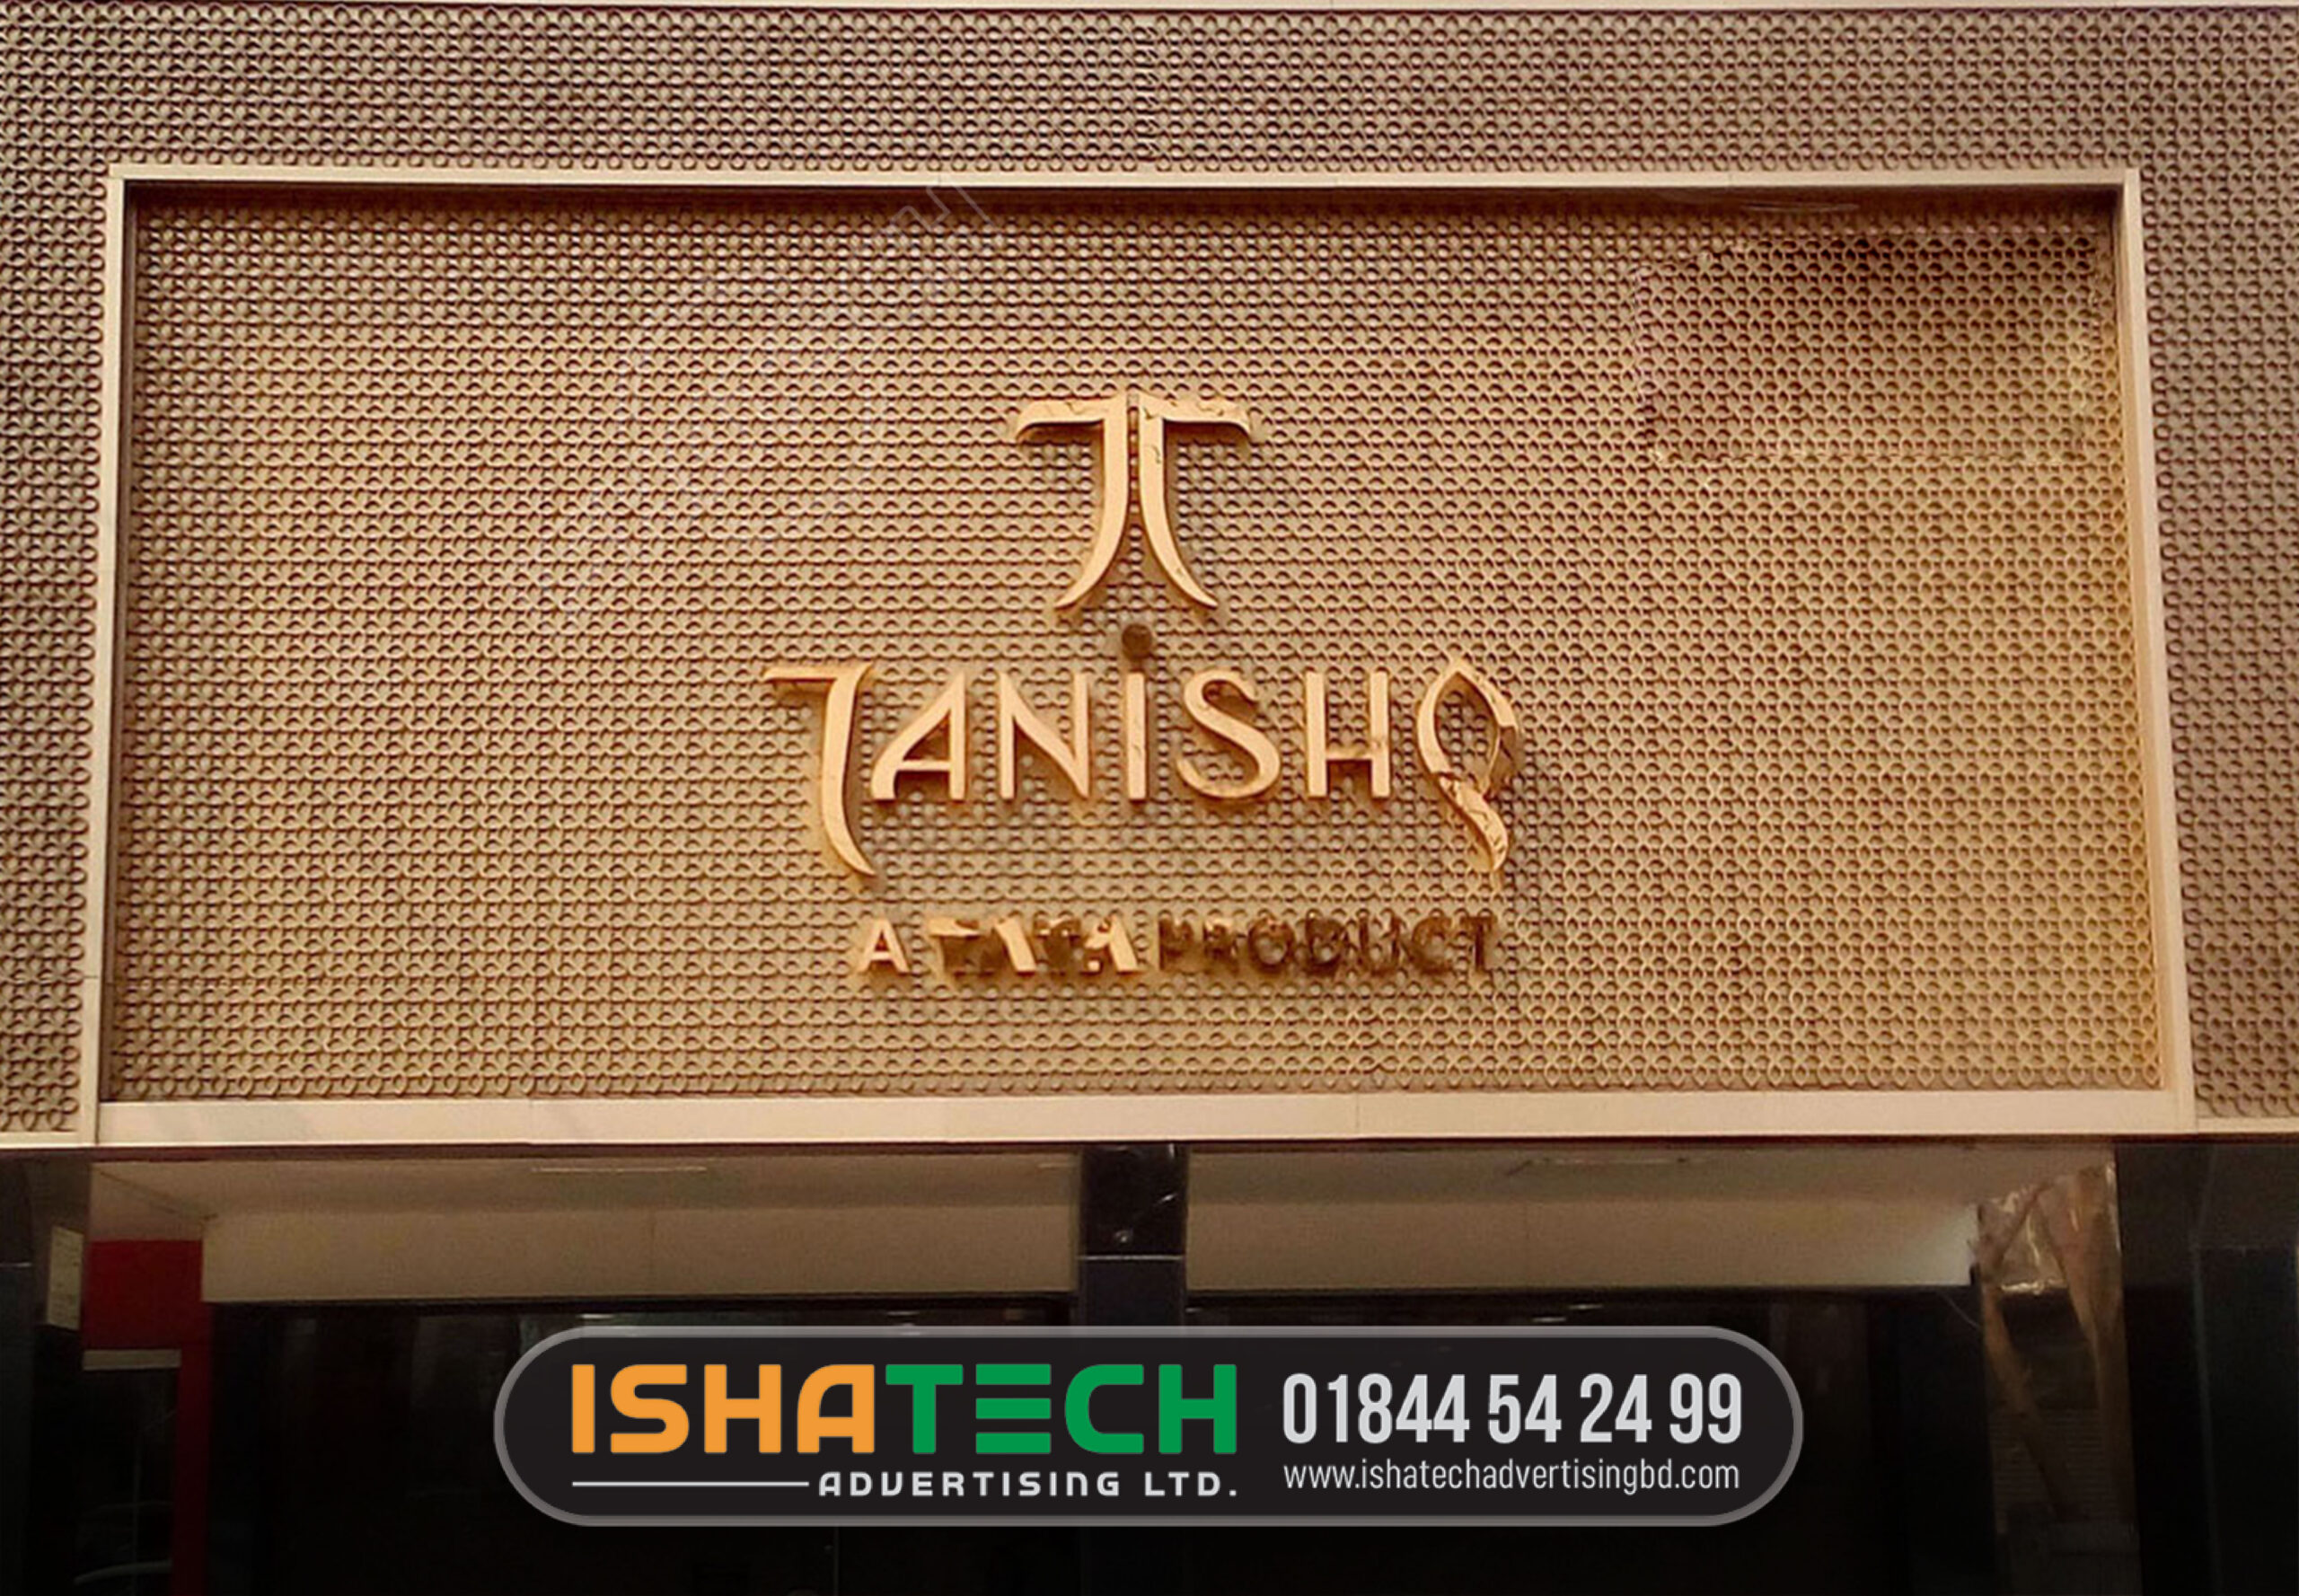 Glossy 3d Ss Letter Board, 3d Ss Letter With Wood 3d Router Cutting, We are the manufacturers of 3D SS letter board that is used for promotional and and advertising purposes. We offered 3D SS letter board is designed using the best quality raw material and progressive technology in adherence.